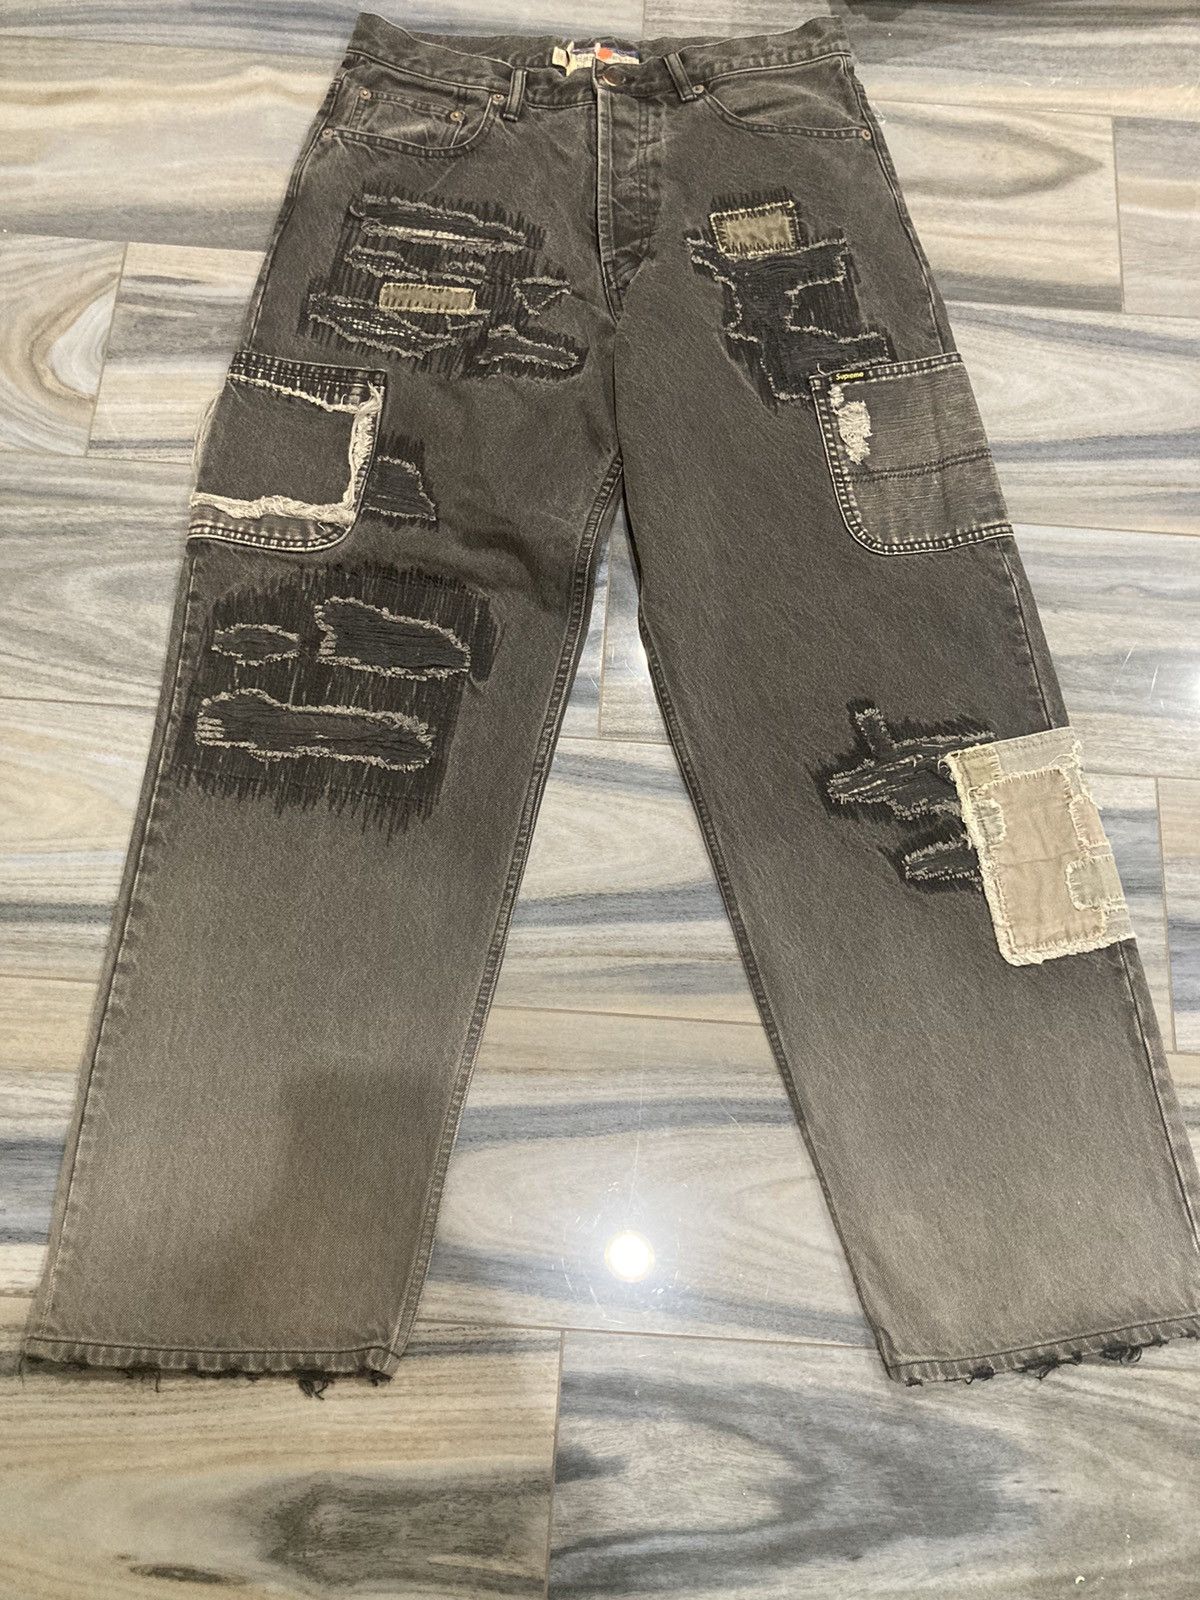 Supreme Supreme x blackmeans 23FW Mended loose fit jeans wash